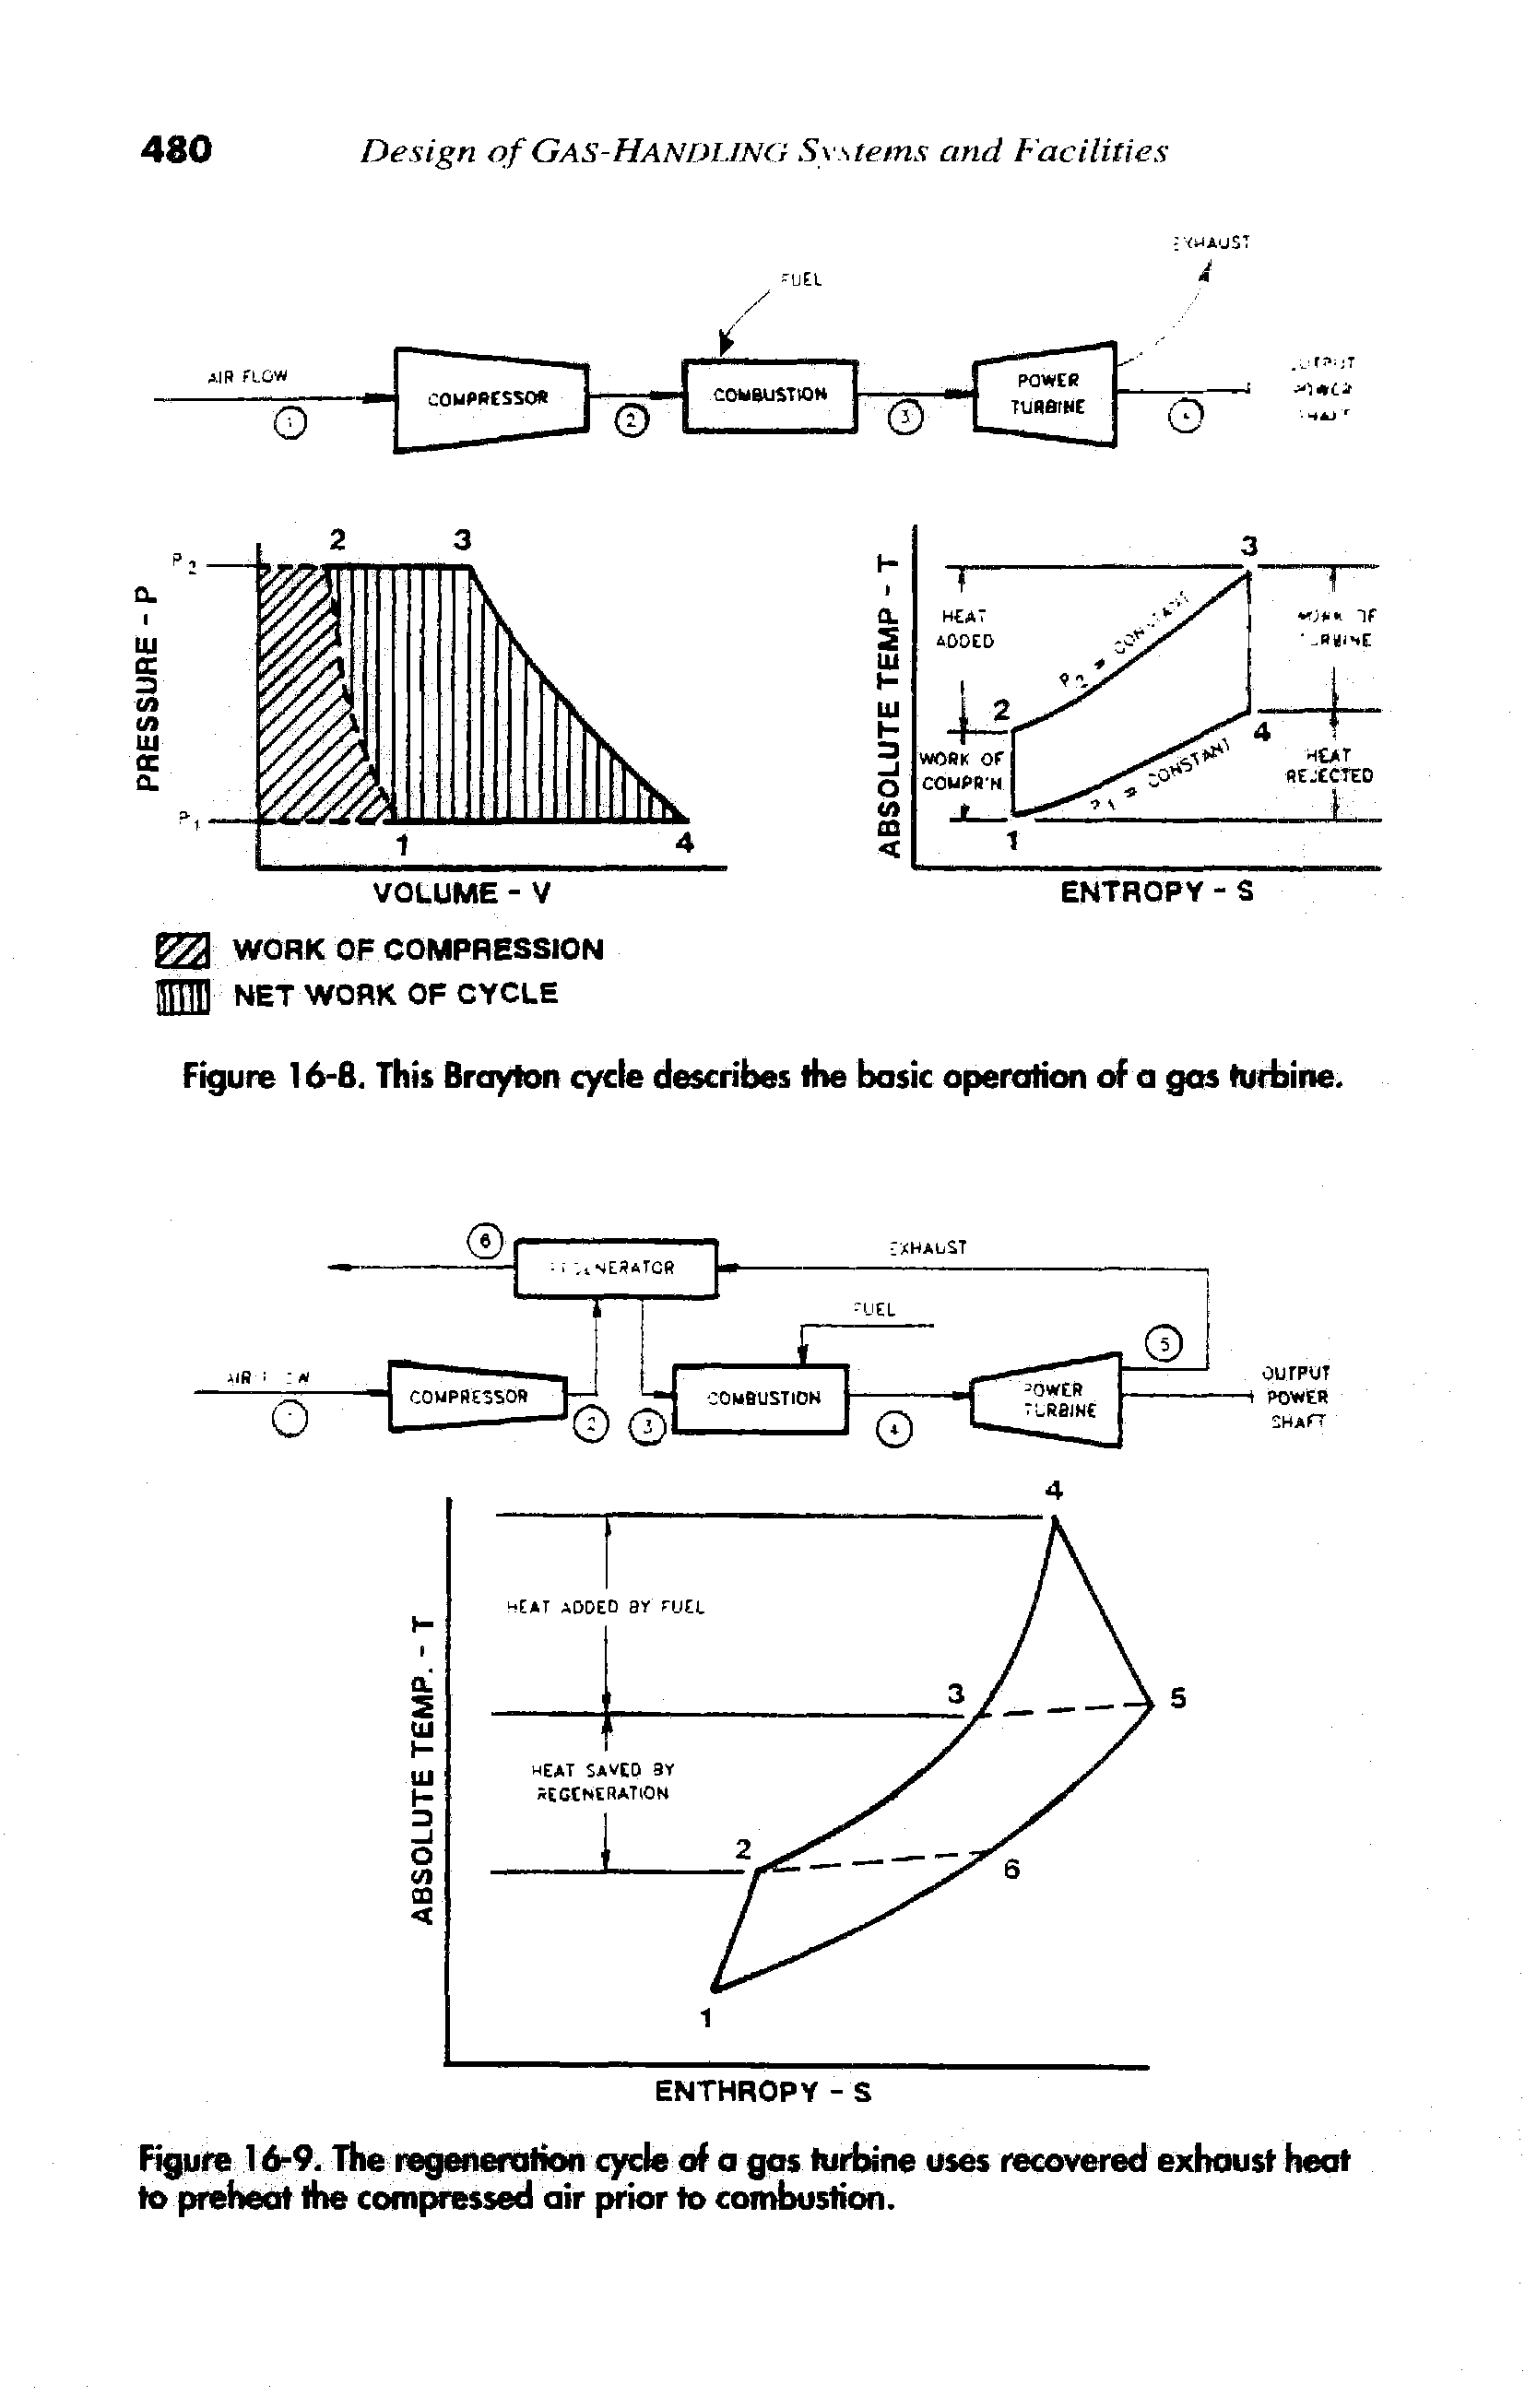 Figure 16-9. The regeneration cycle of o gas turbine uses recovered exhaust heat to preheat the compressed air prior to combustion.